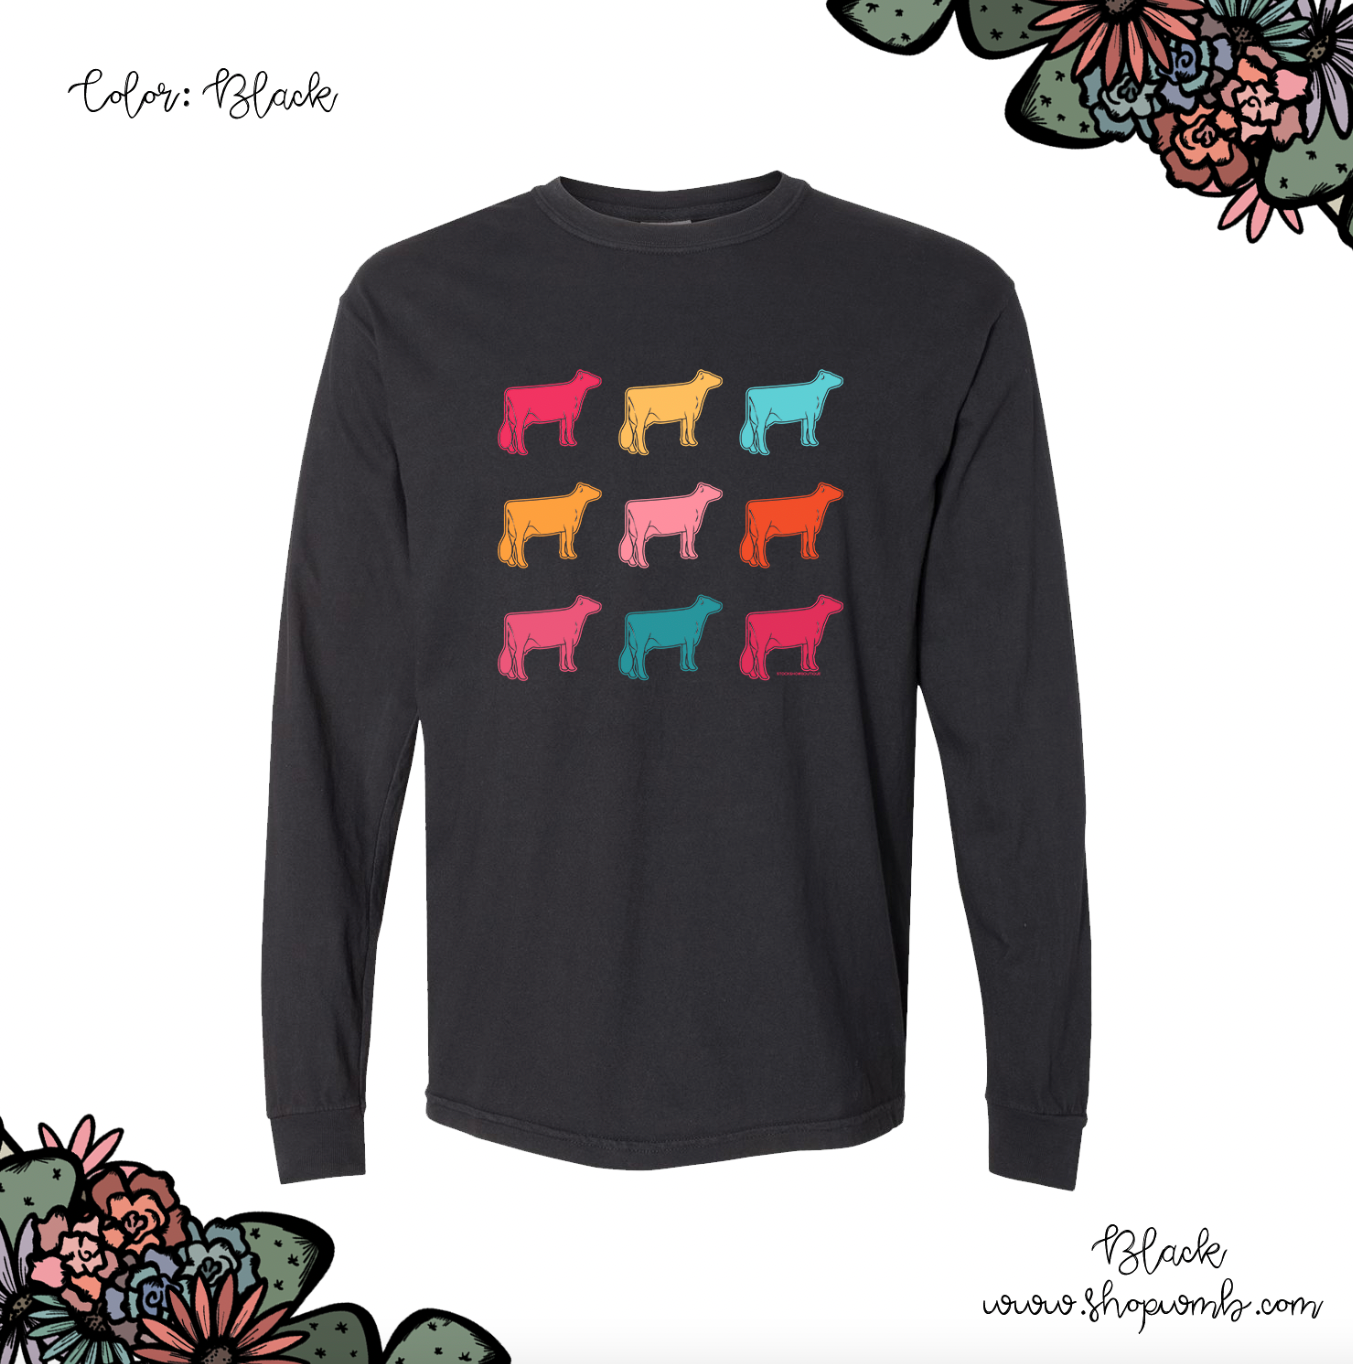 Colorful Dairy LONG SLEEVE T-Shirt (S-3XL) - Multiple Colors!